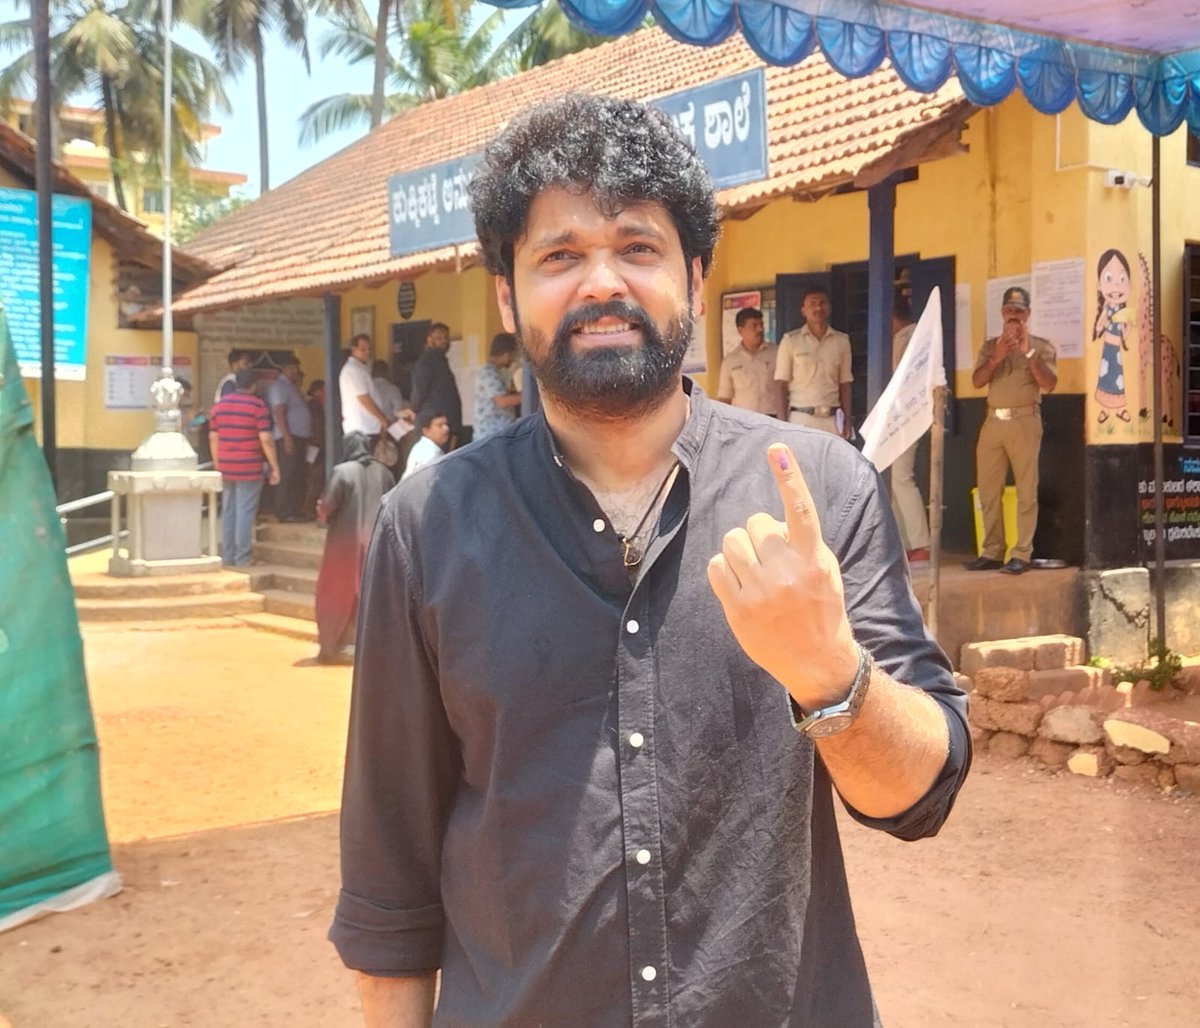 #ElectionsWithTheHindu | Several members of the Kannada film fraternity turned up at polling booths across Bengaluru to cast their votes. They also uploaded the images on their social media, encouraging millions of their followers to exercise their franchise.…